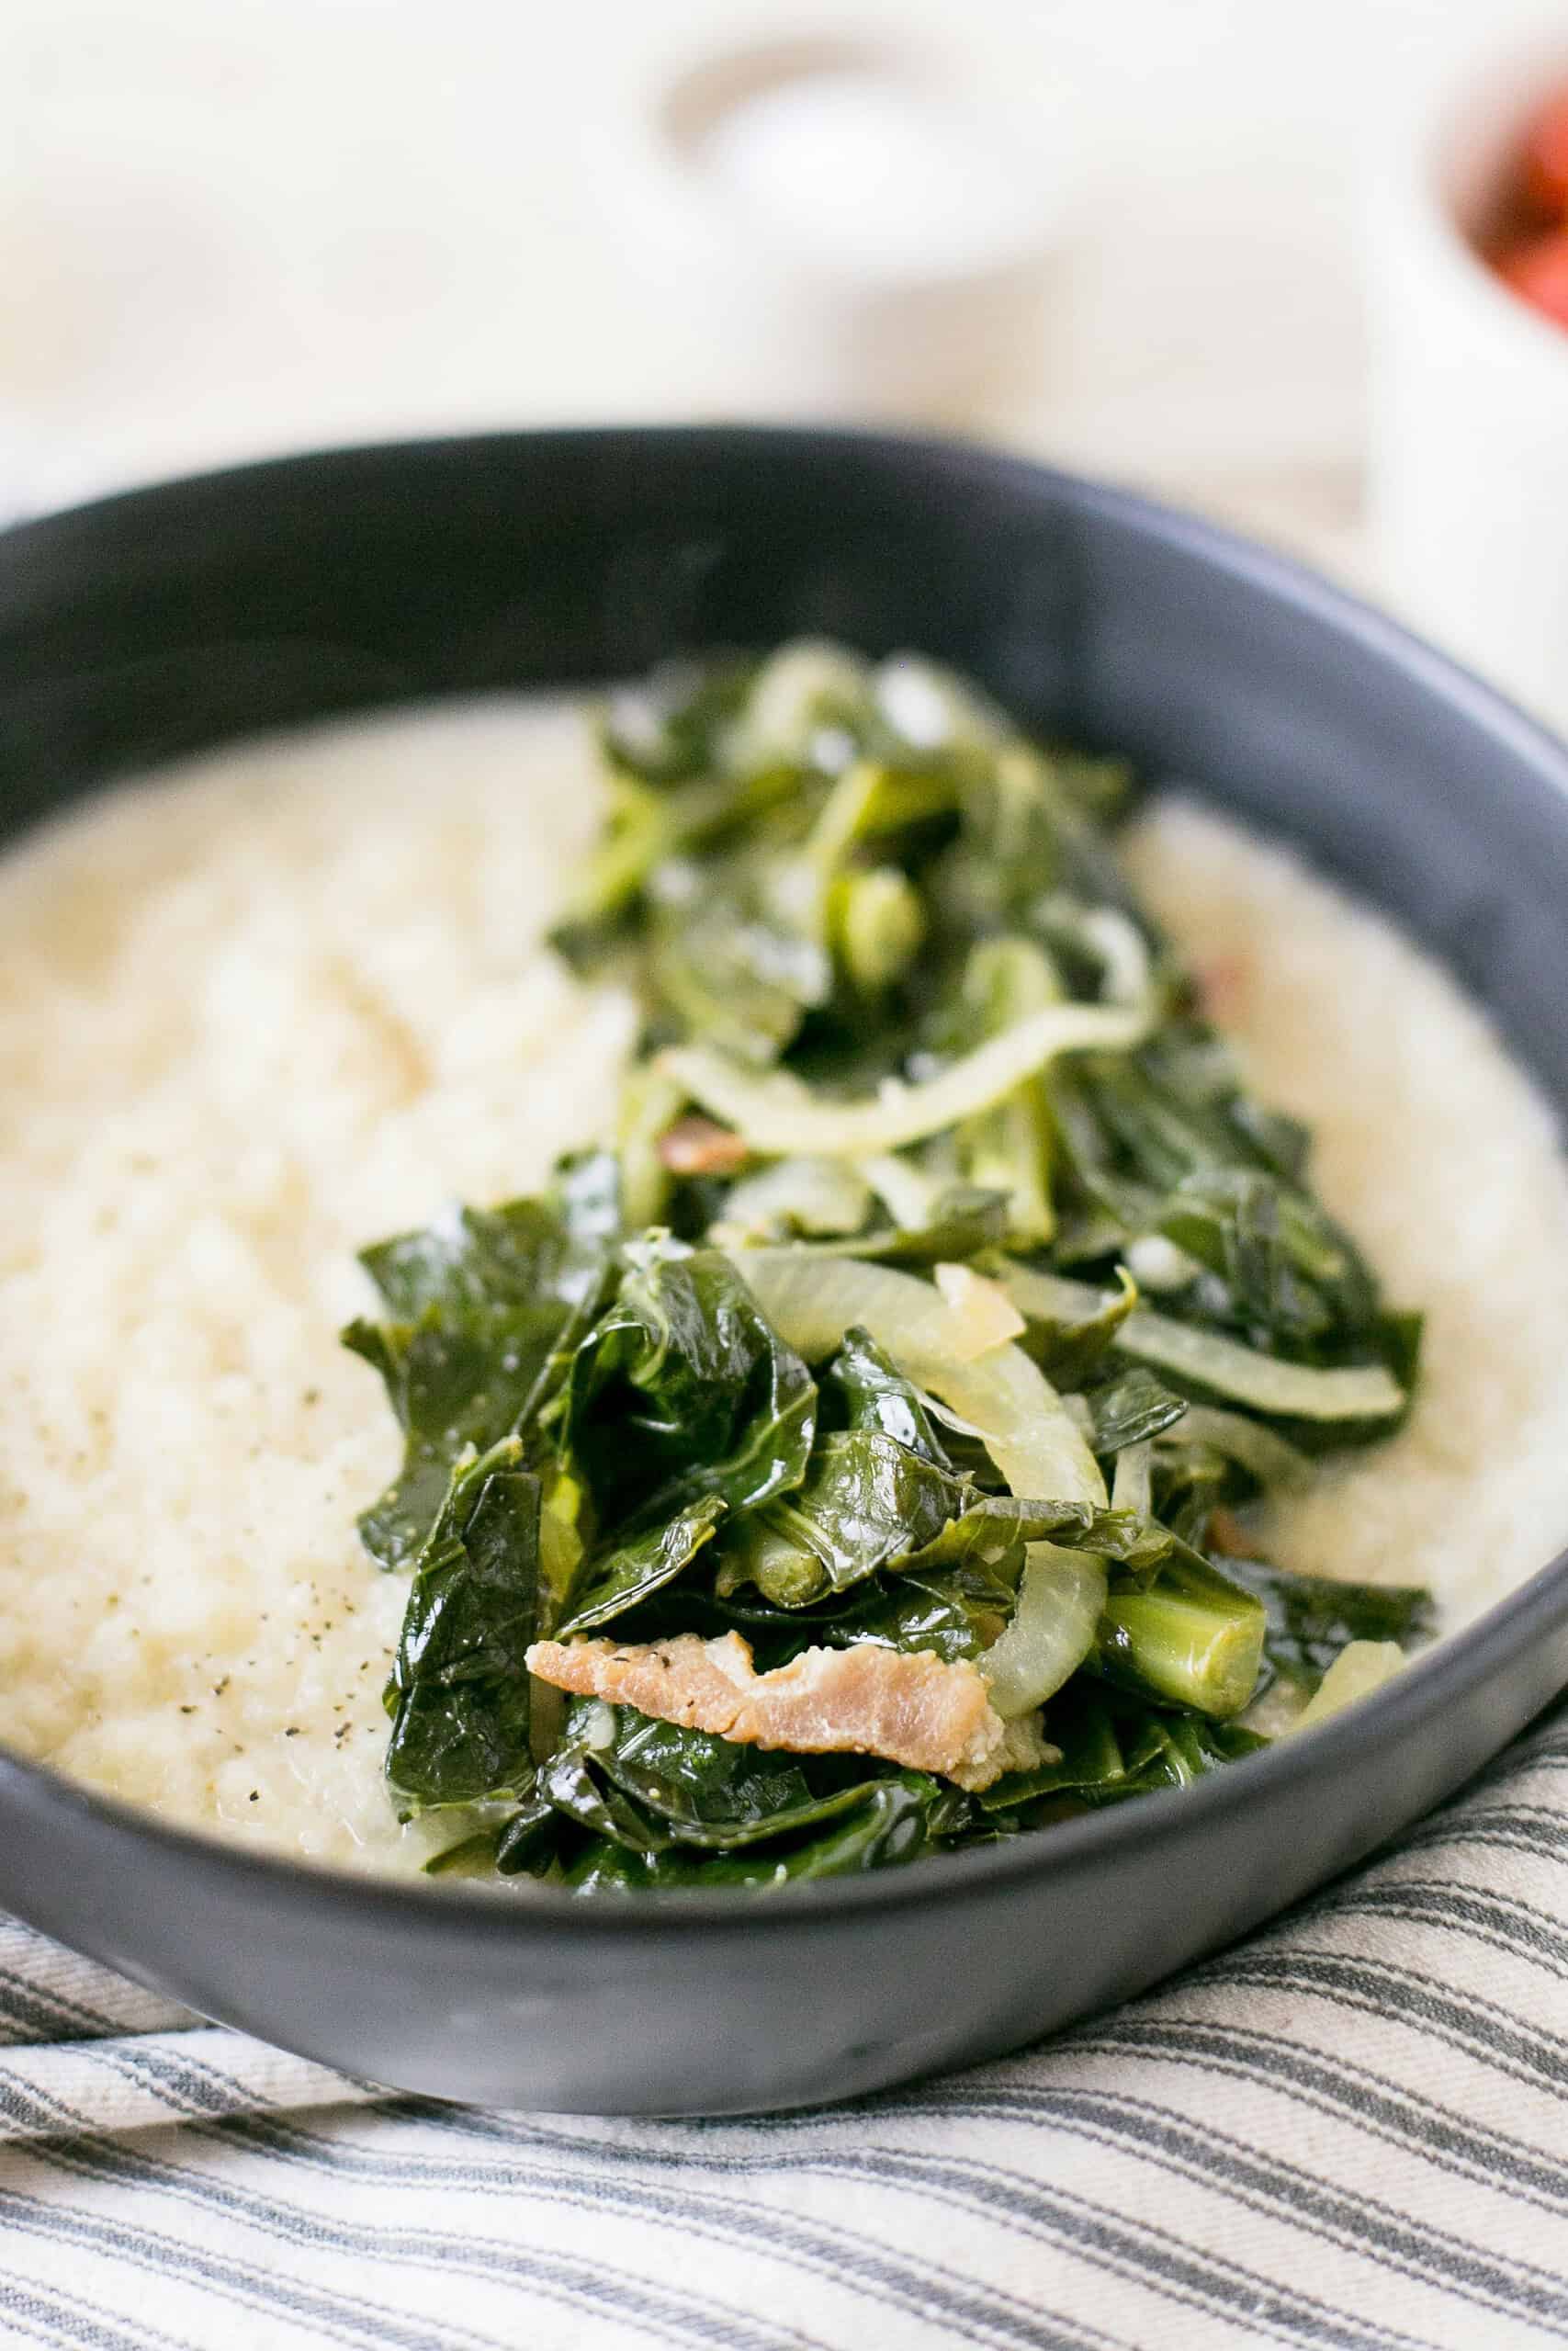 white grits in a gray bowl topped with greens on a strip towel